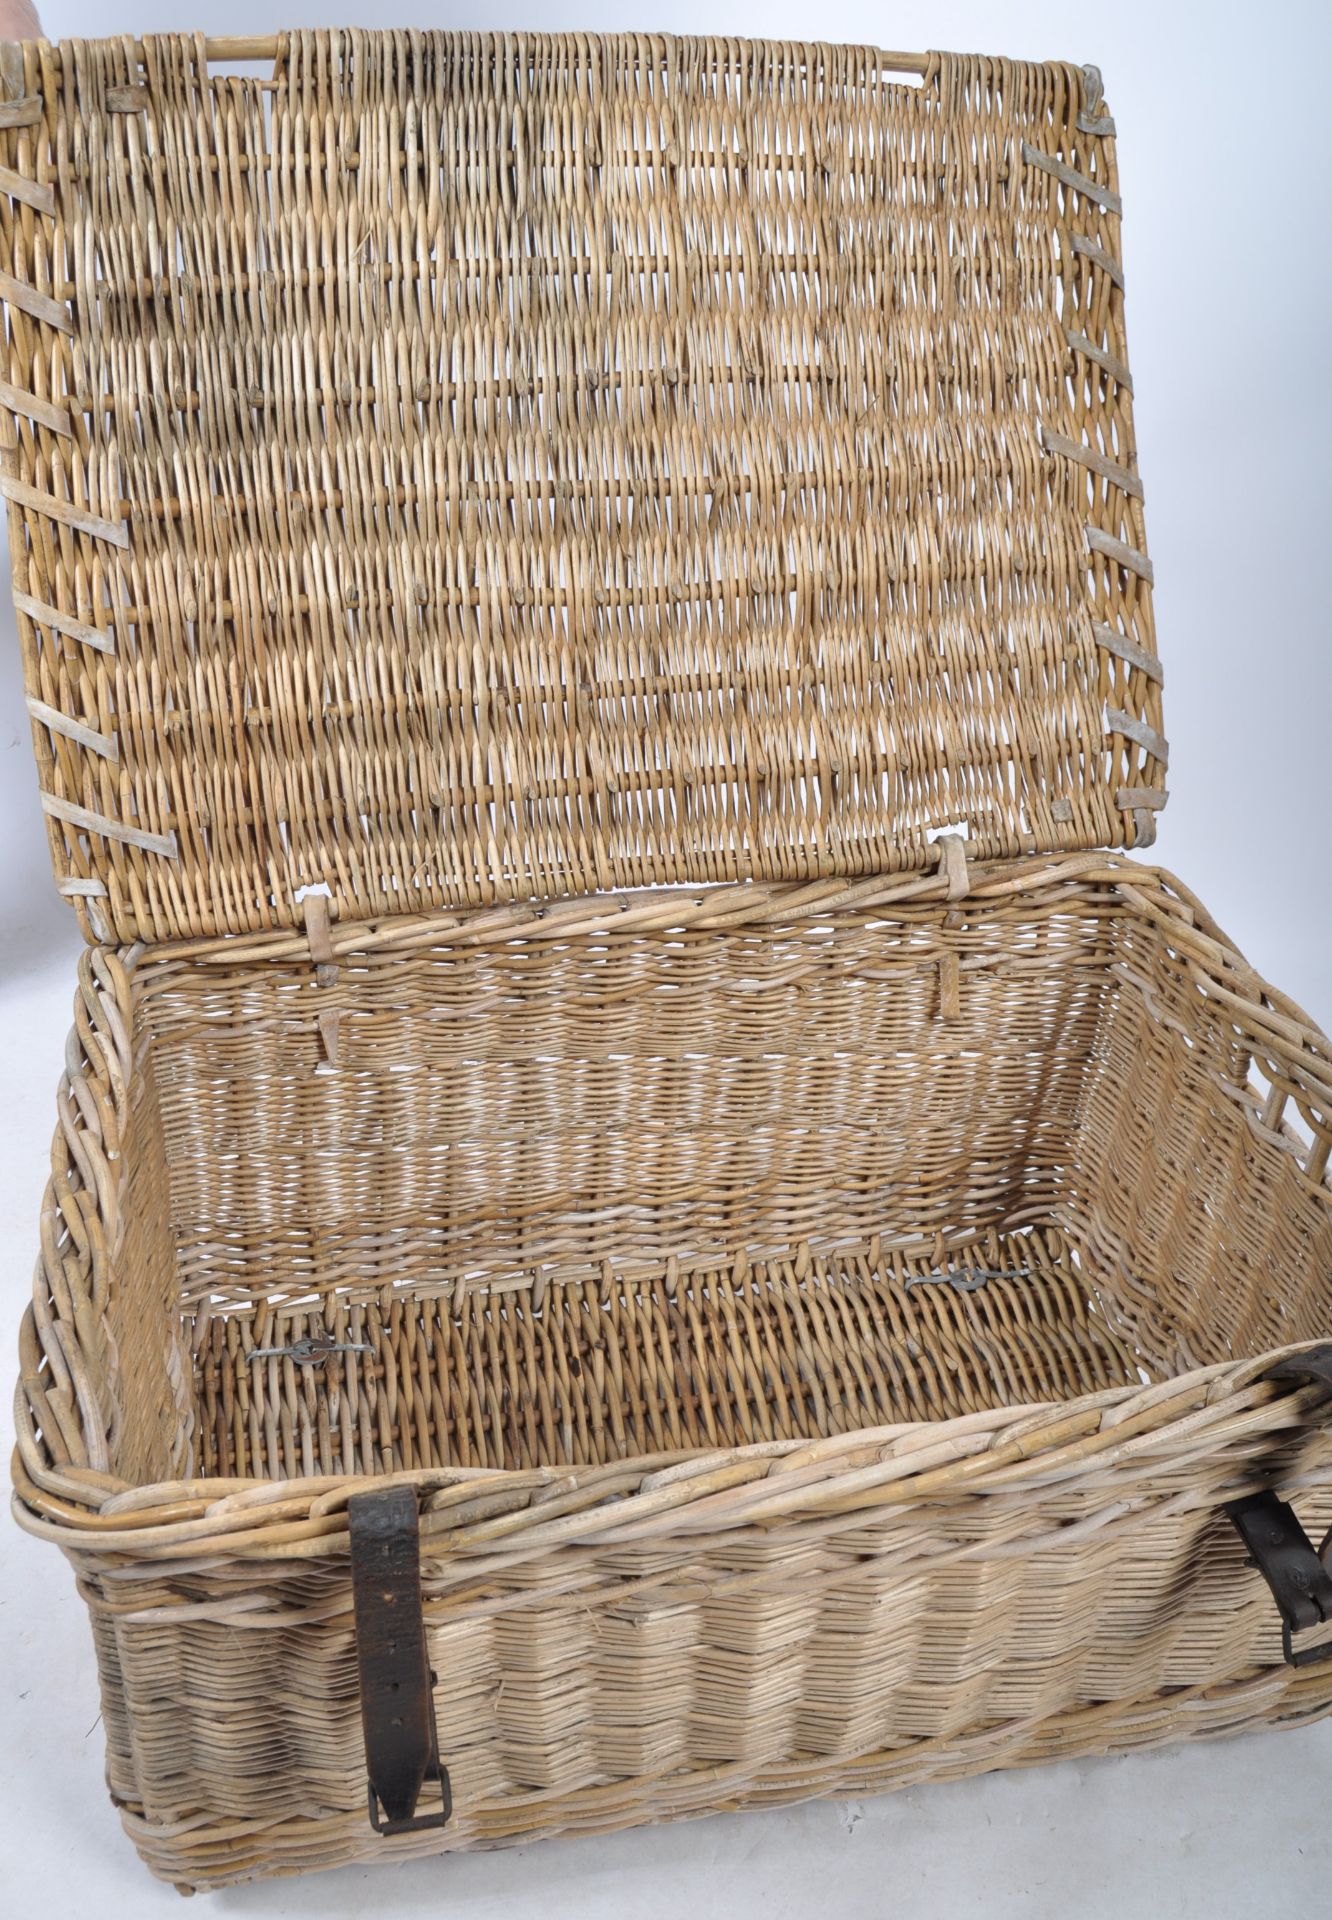 LARGE EARLY 20TH CENTURY WICKER LAUNDRY BASKET CHEST - Image 4 of 4